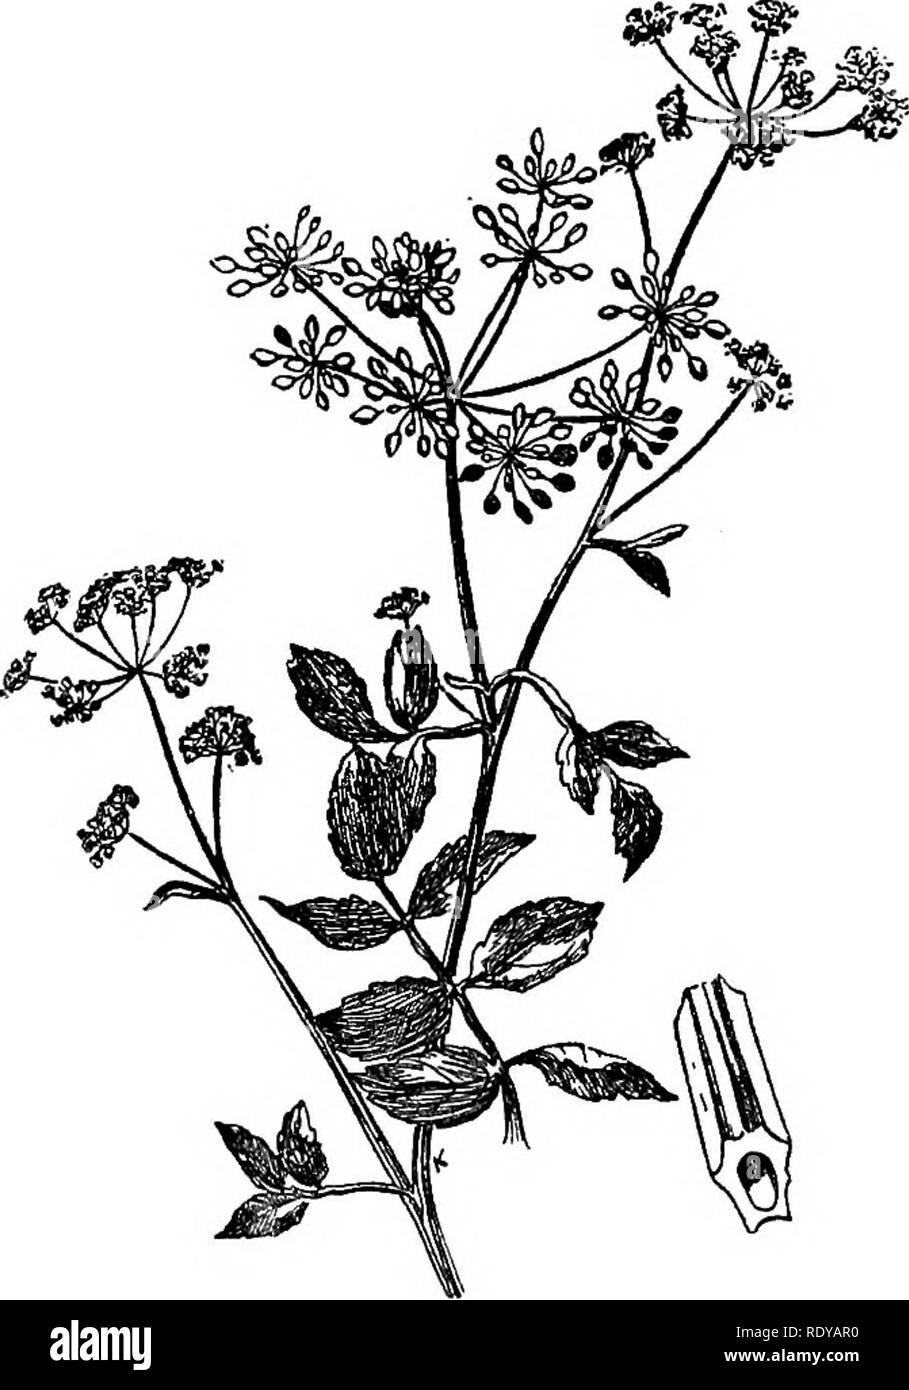 . A manual of poisonous plants, chiefly of eastern North America, with brief notes on economic and medicinal plants, and numerous illustrations. Poisonous plants. 662 MANUAL OF POISONOUS PLANTS erick B. Power and one of his pupils (Mr. J. T. Bennett) undertook some experiments to determine whether the cultivated parsnip running wild had any toxic properties. Mr. Bennett failed to detect the presence of any poisonous principle in the root of the true wild parsnip (Pastinaca sativa) and when the boiled roots were fed in considerable amounts to a cat, no symptoms of poisoning were manifest. We ma Stock Photo